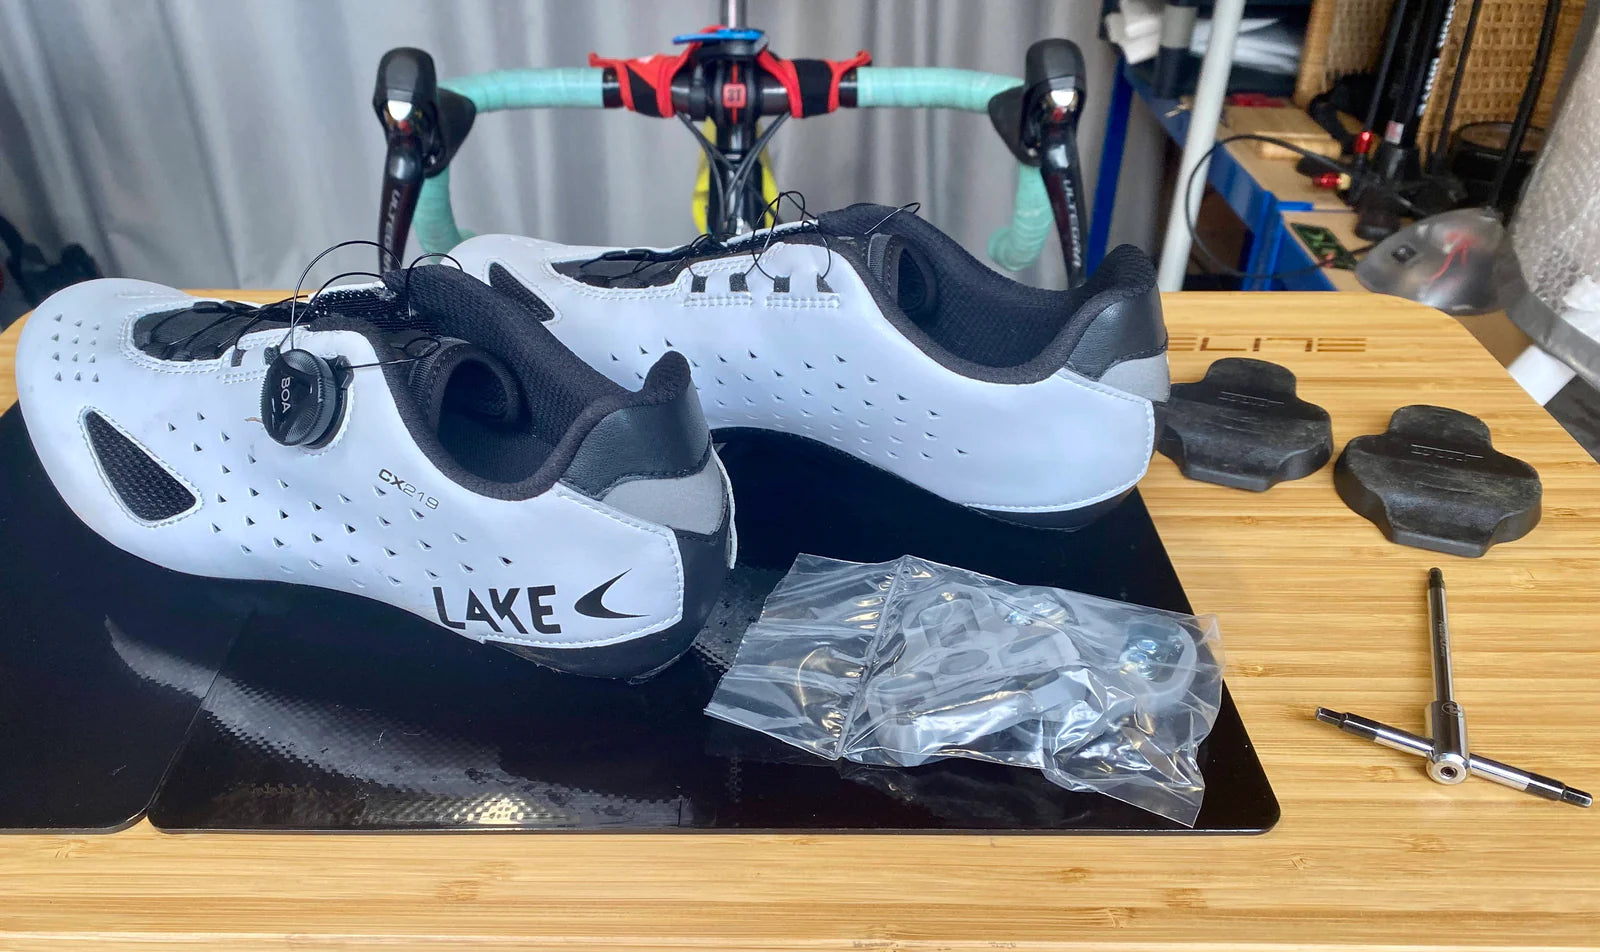 Do Cycling Shoes Come in a Wide Fit?